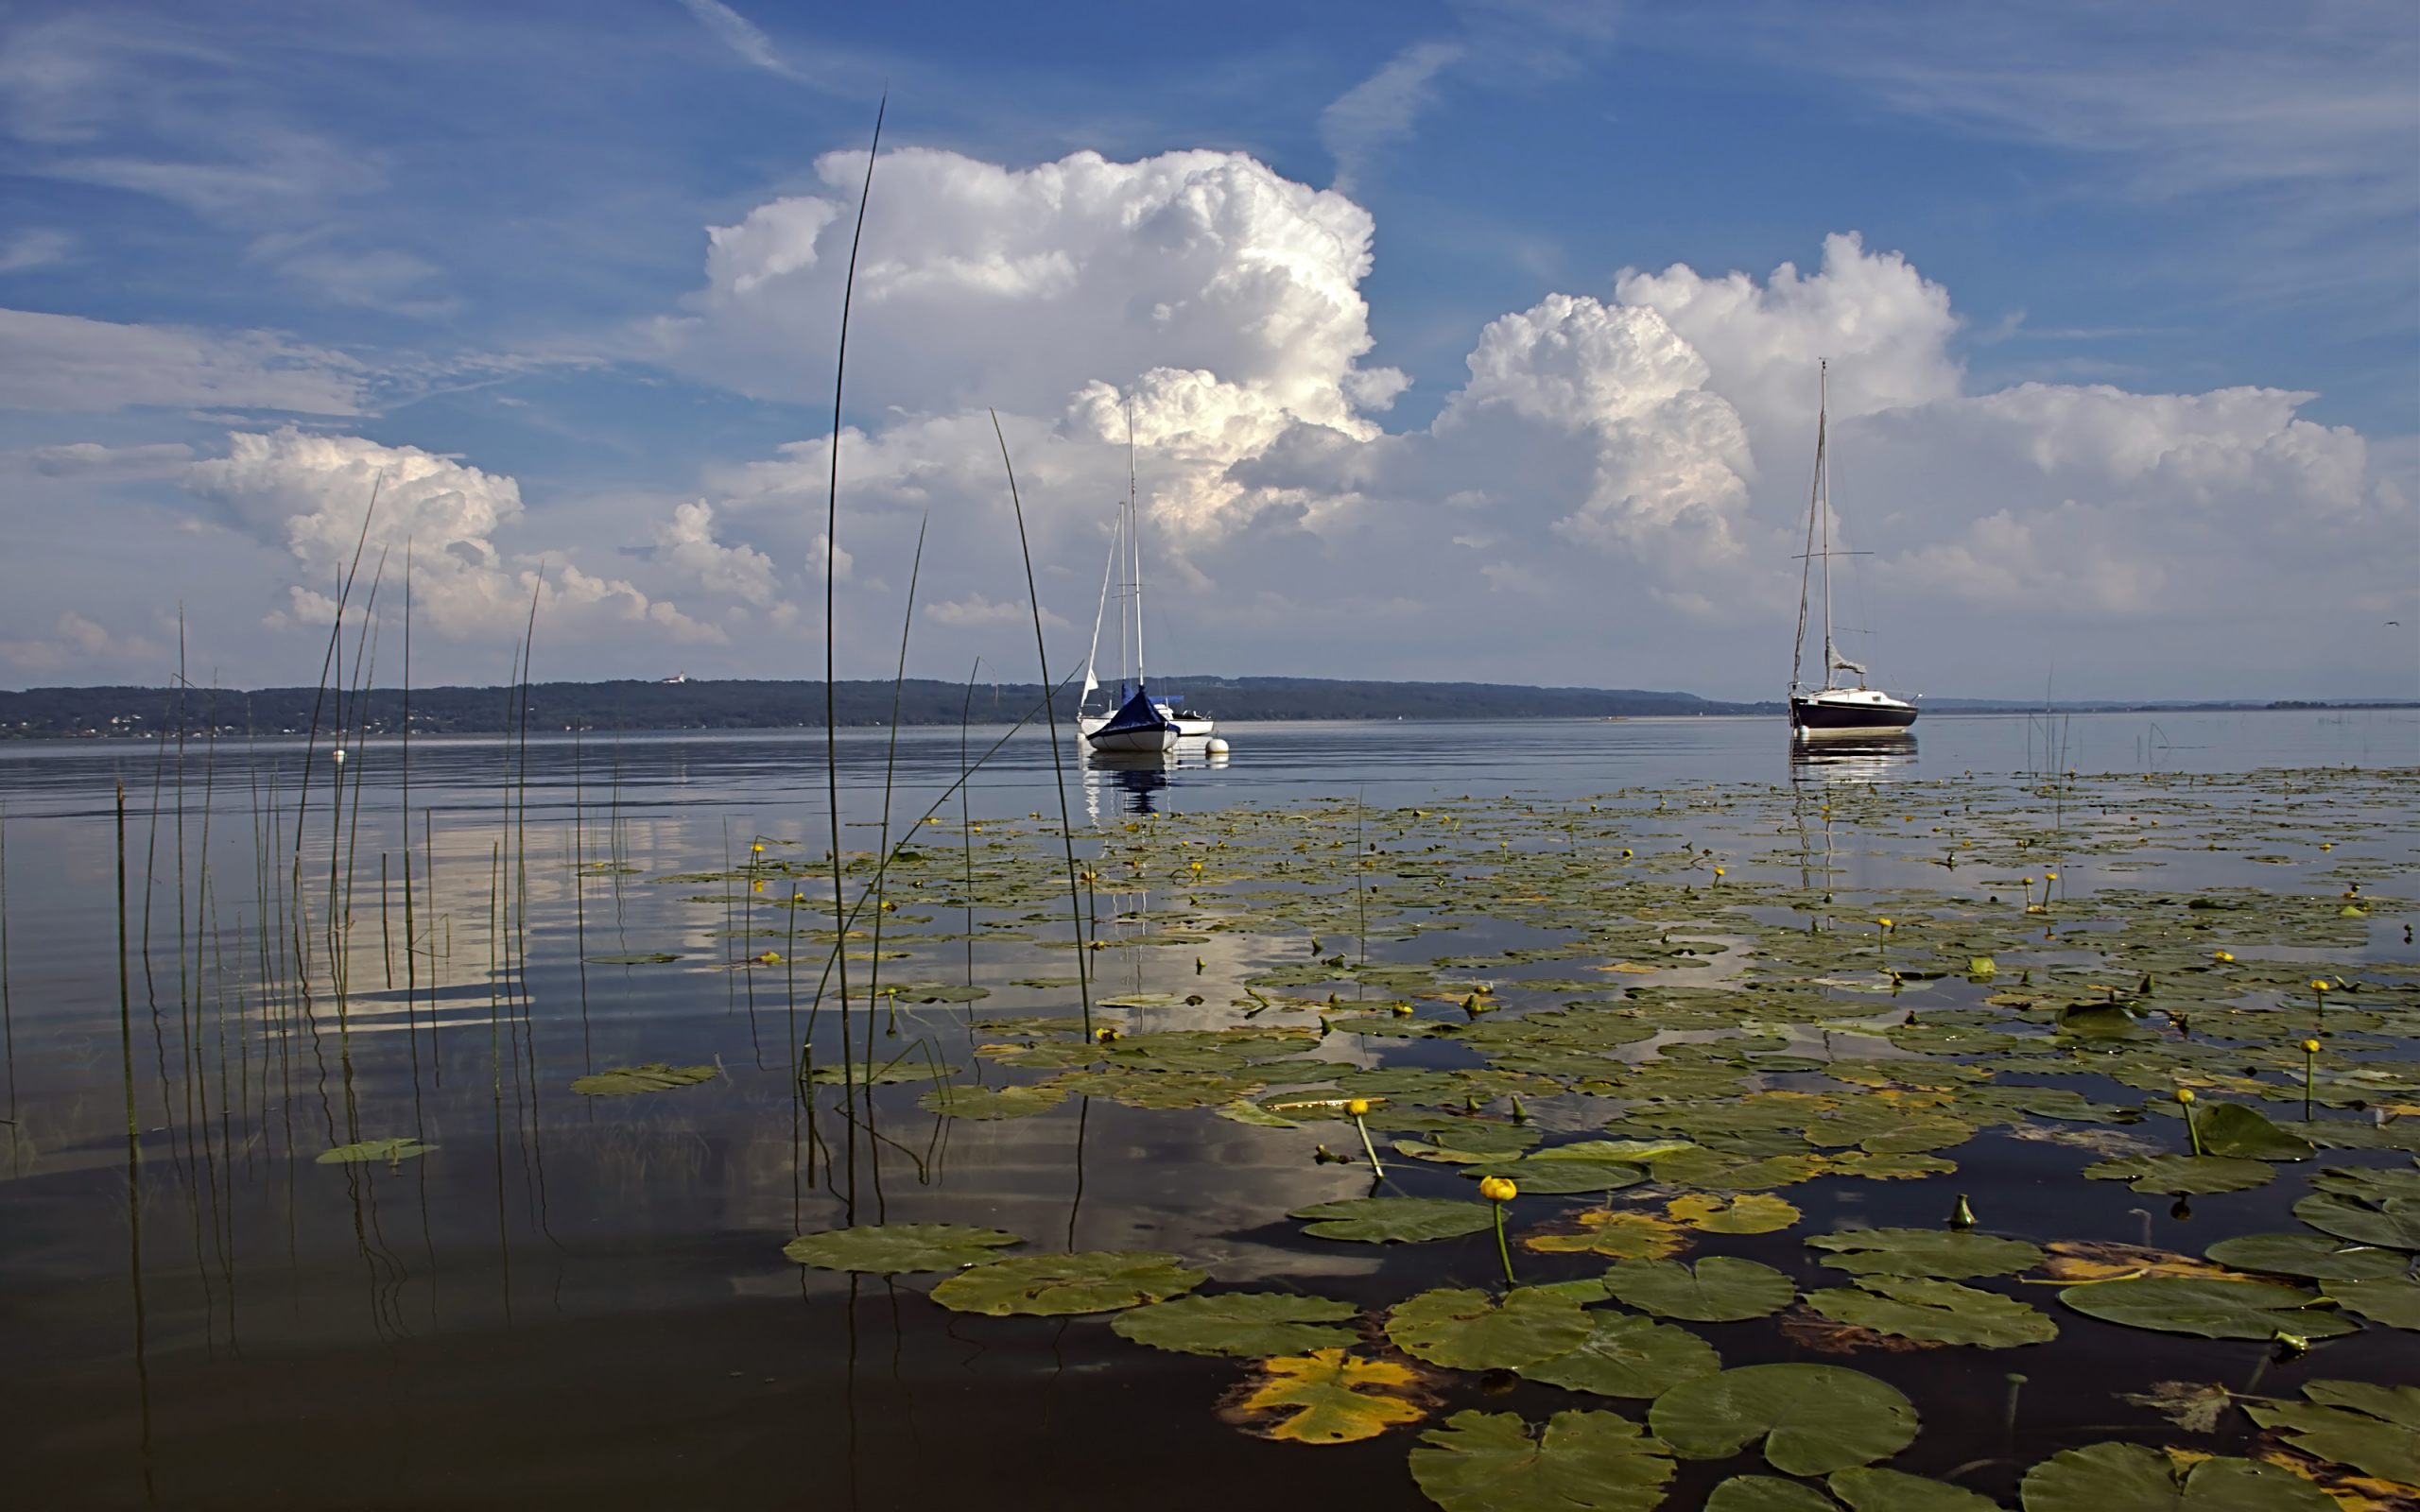 Idyllic view of Lake Ammersee surrounded by picturesque scenery.